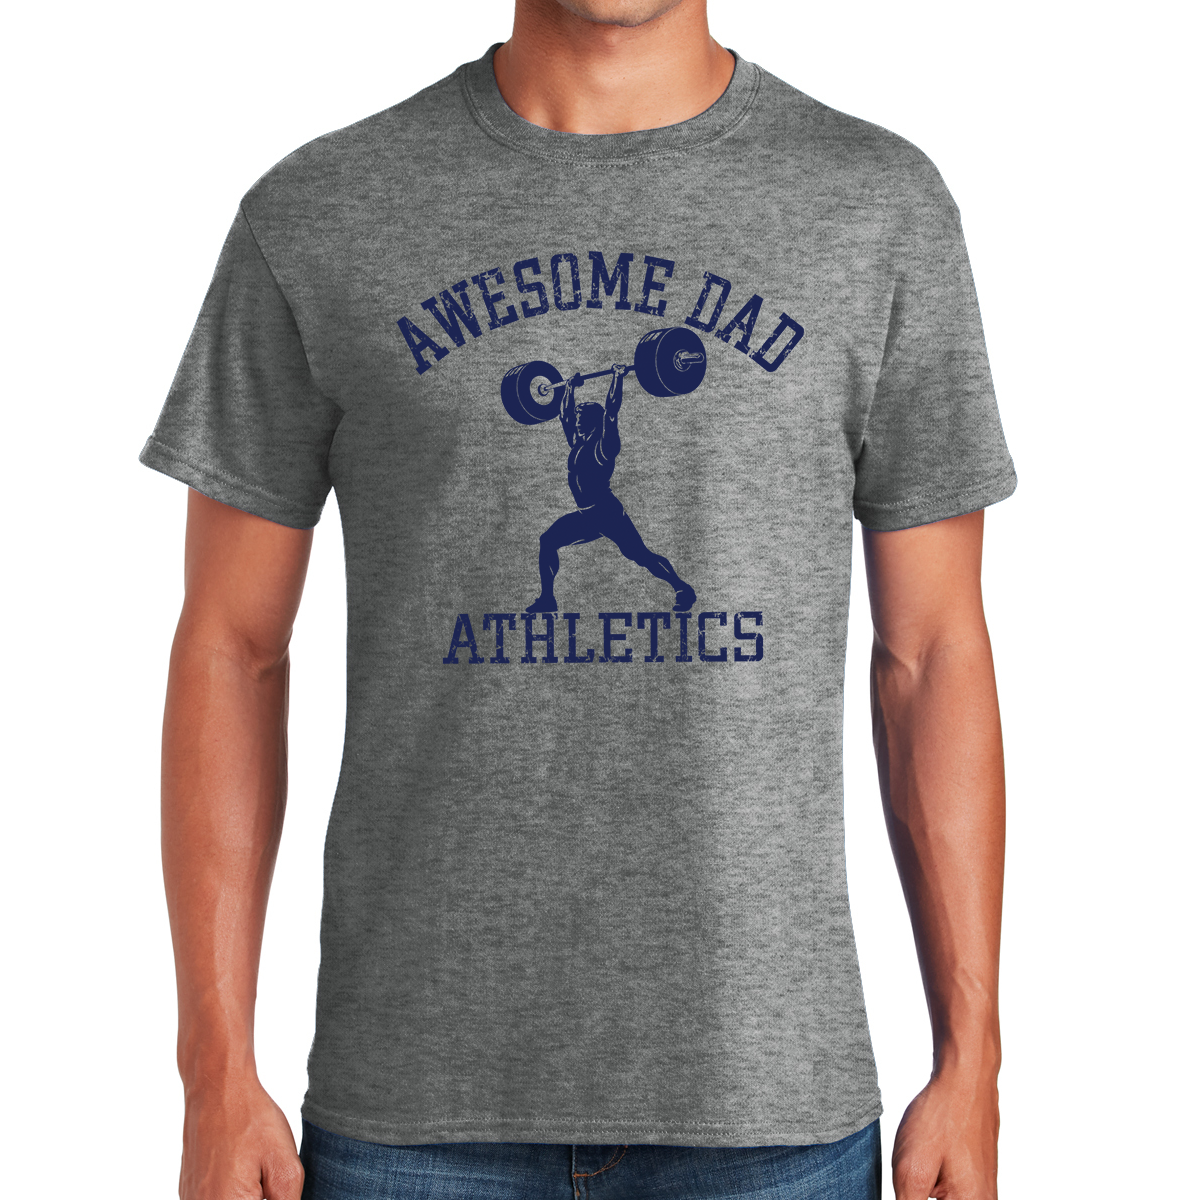 Awesome Dad Athletics Weightlifter Lifting with Strength and Style Gifts for Dads T-shirt